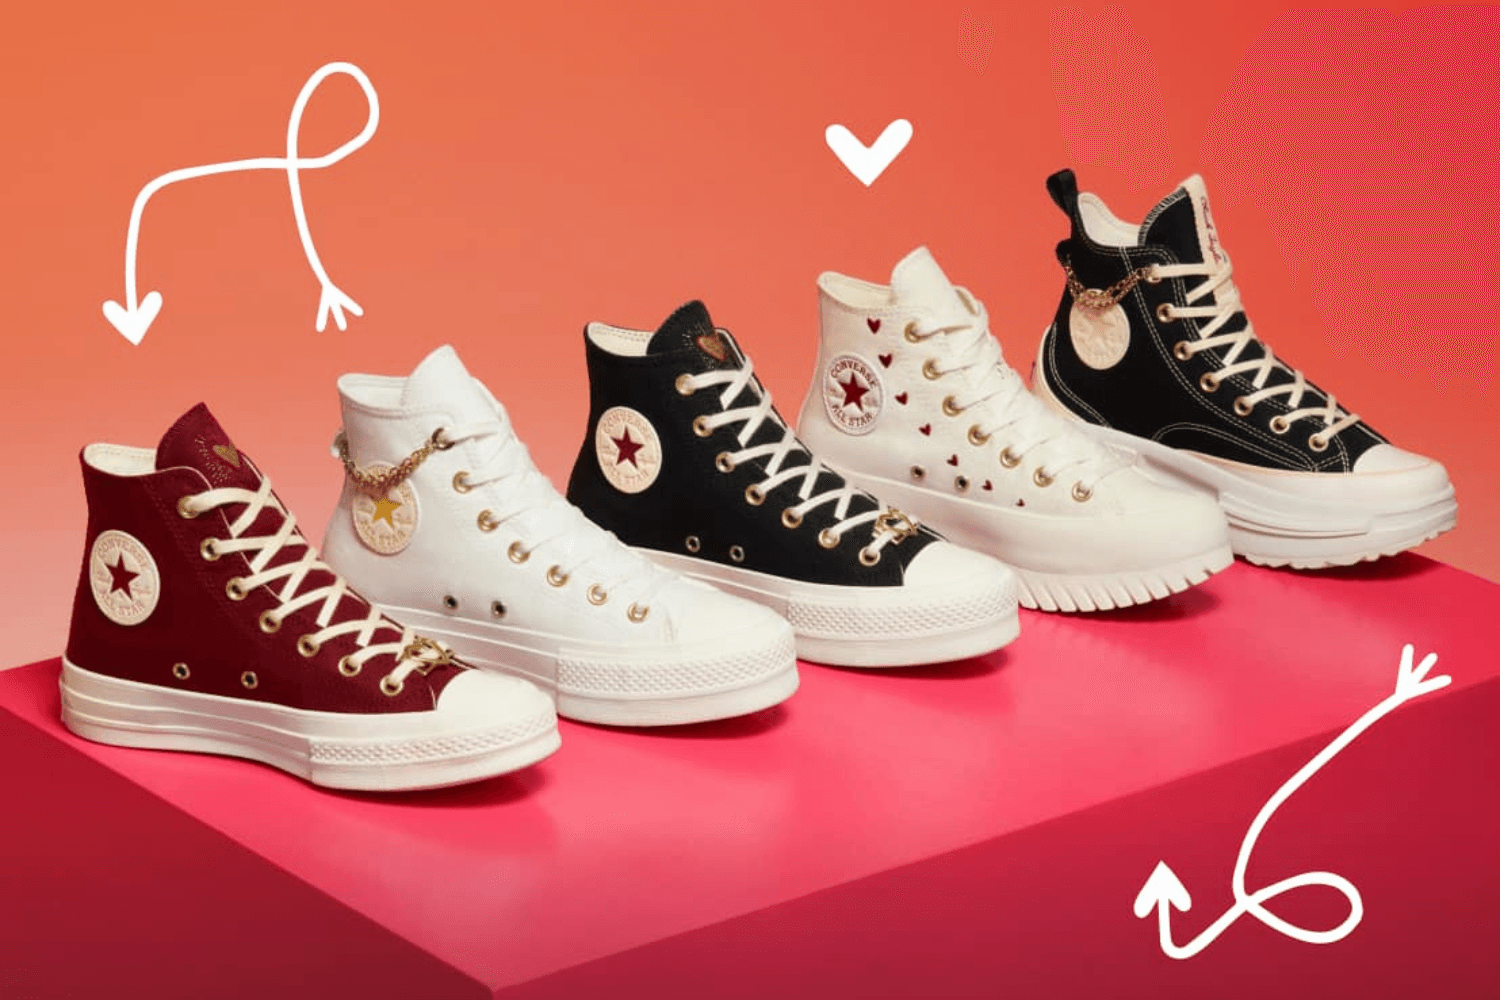 Converse presents the Valentine's Day collection 2023